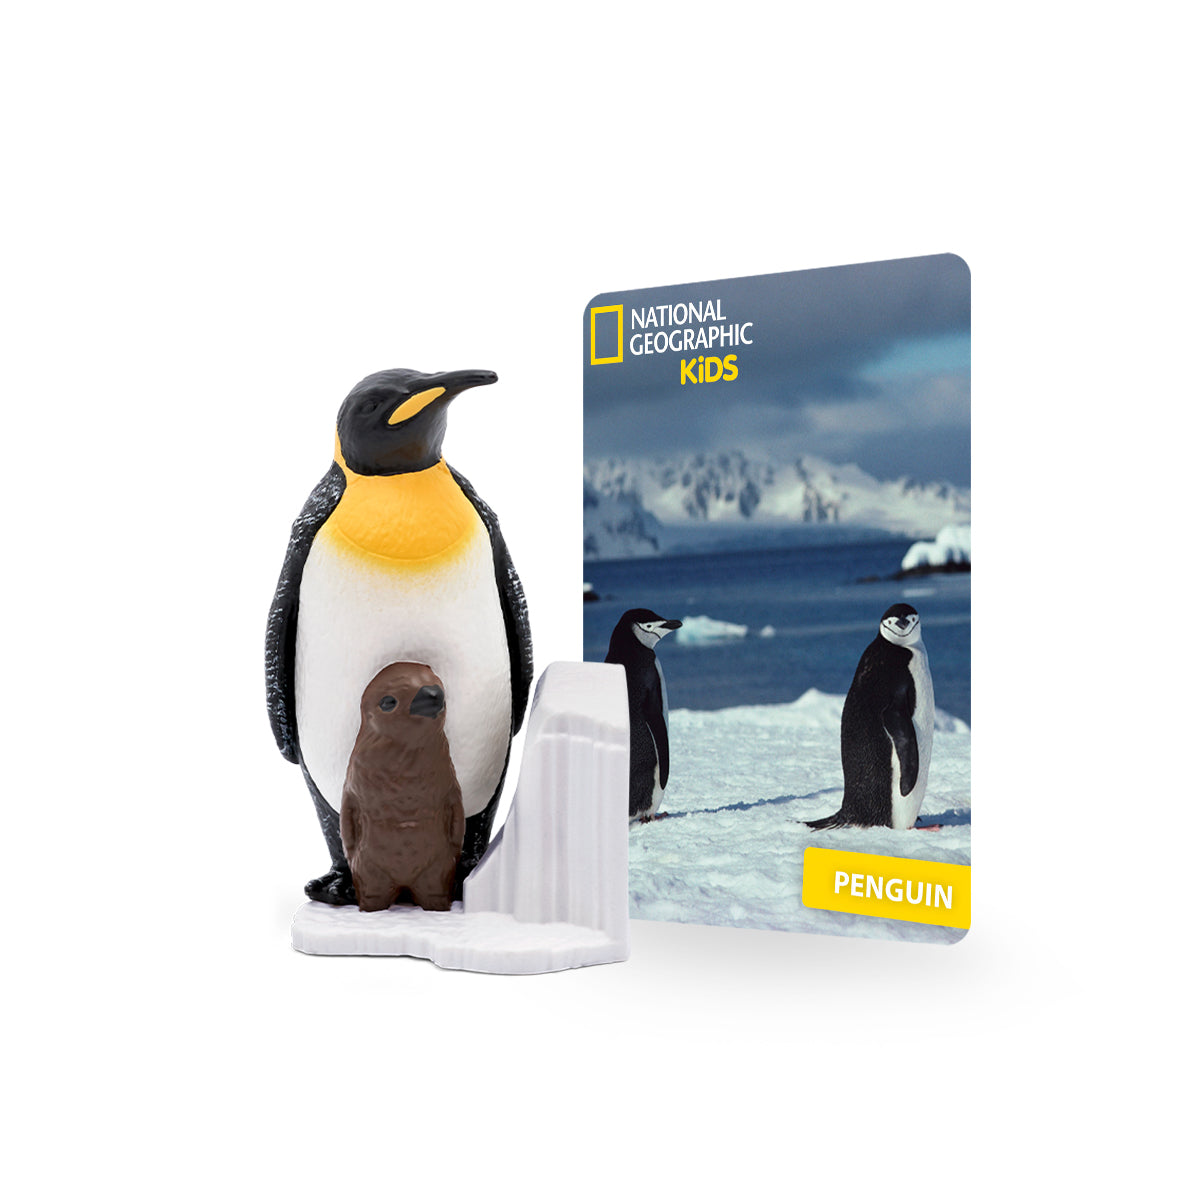 National Geographic Kids: Penguin